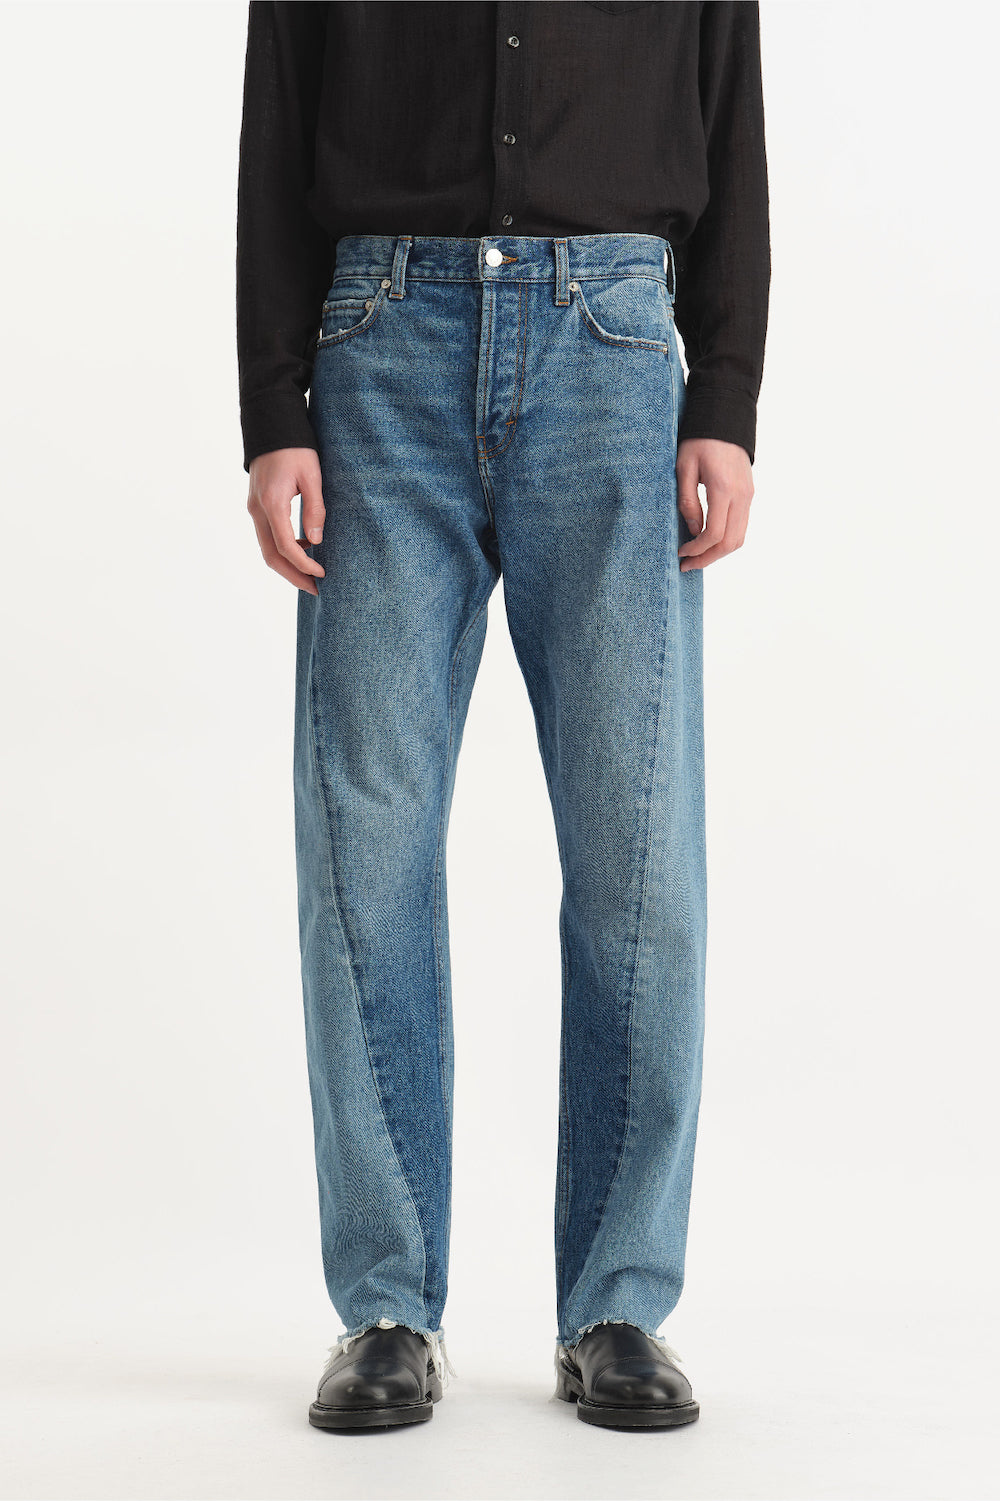 Twisted Cut Jeans